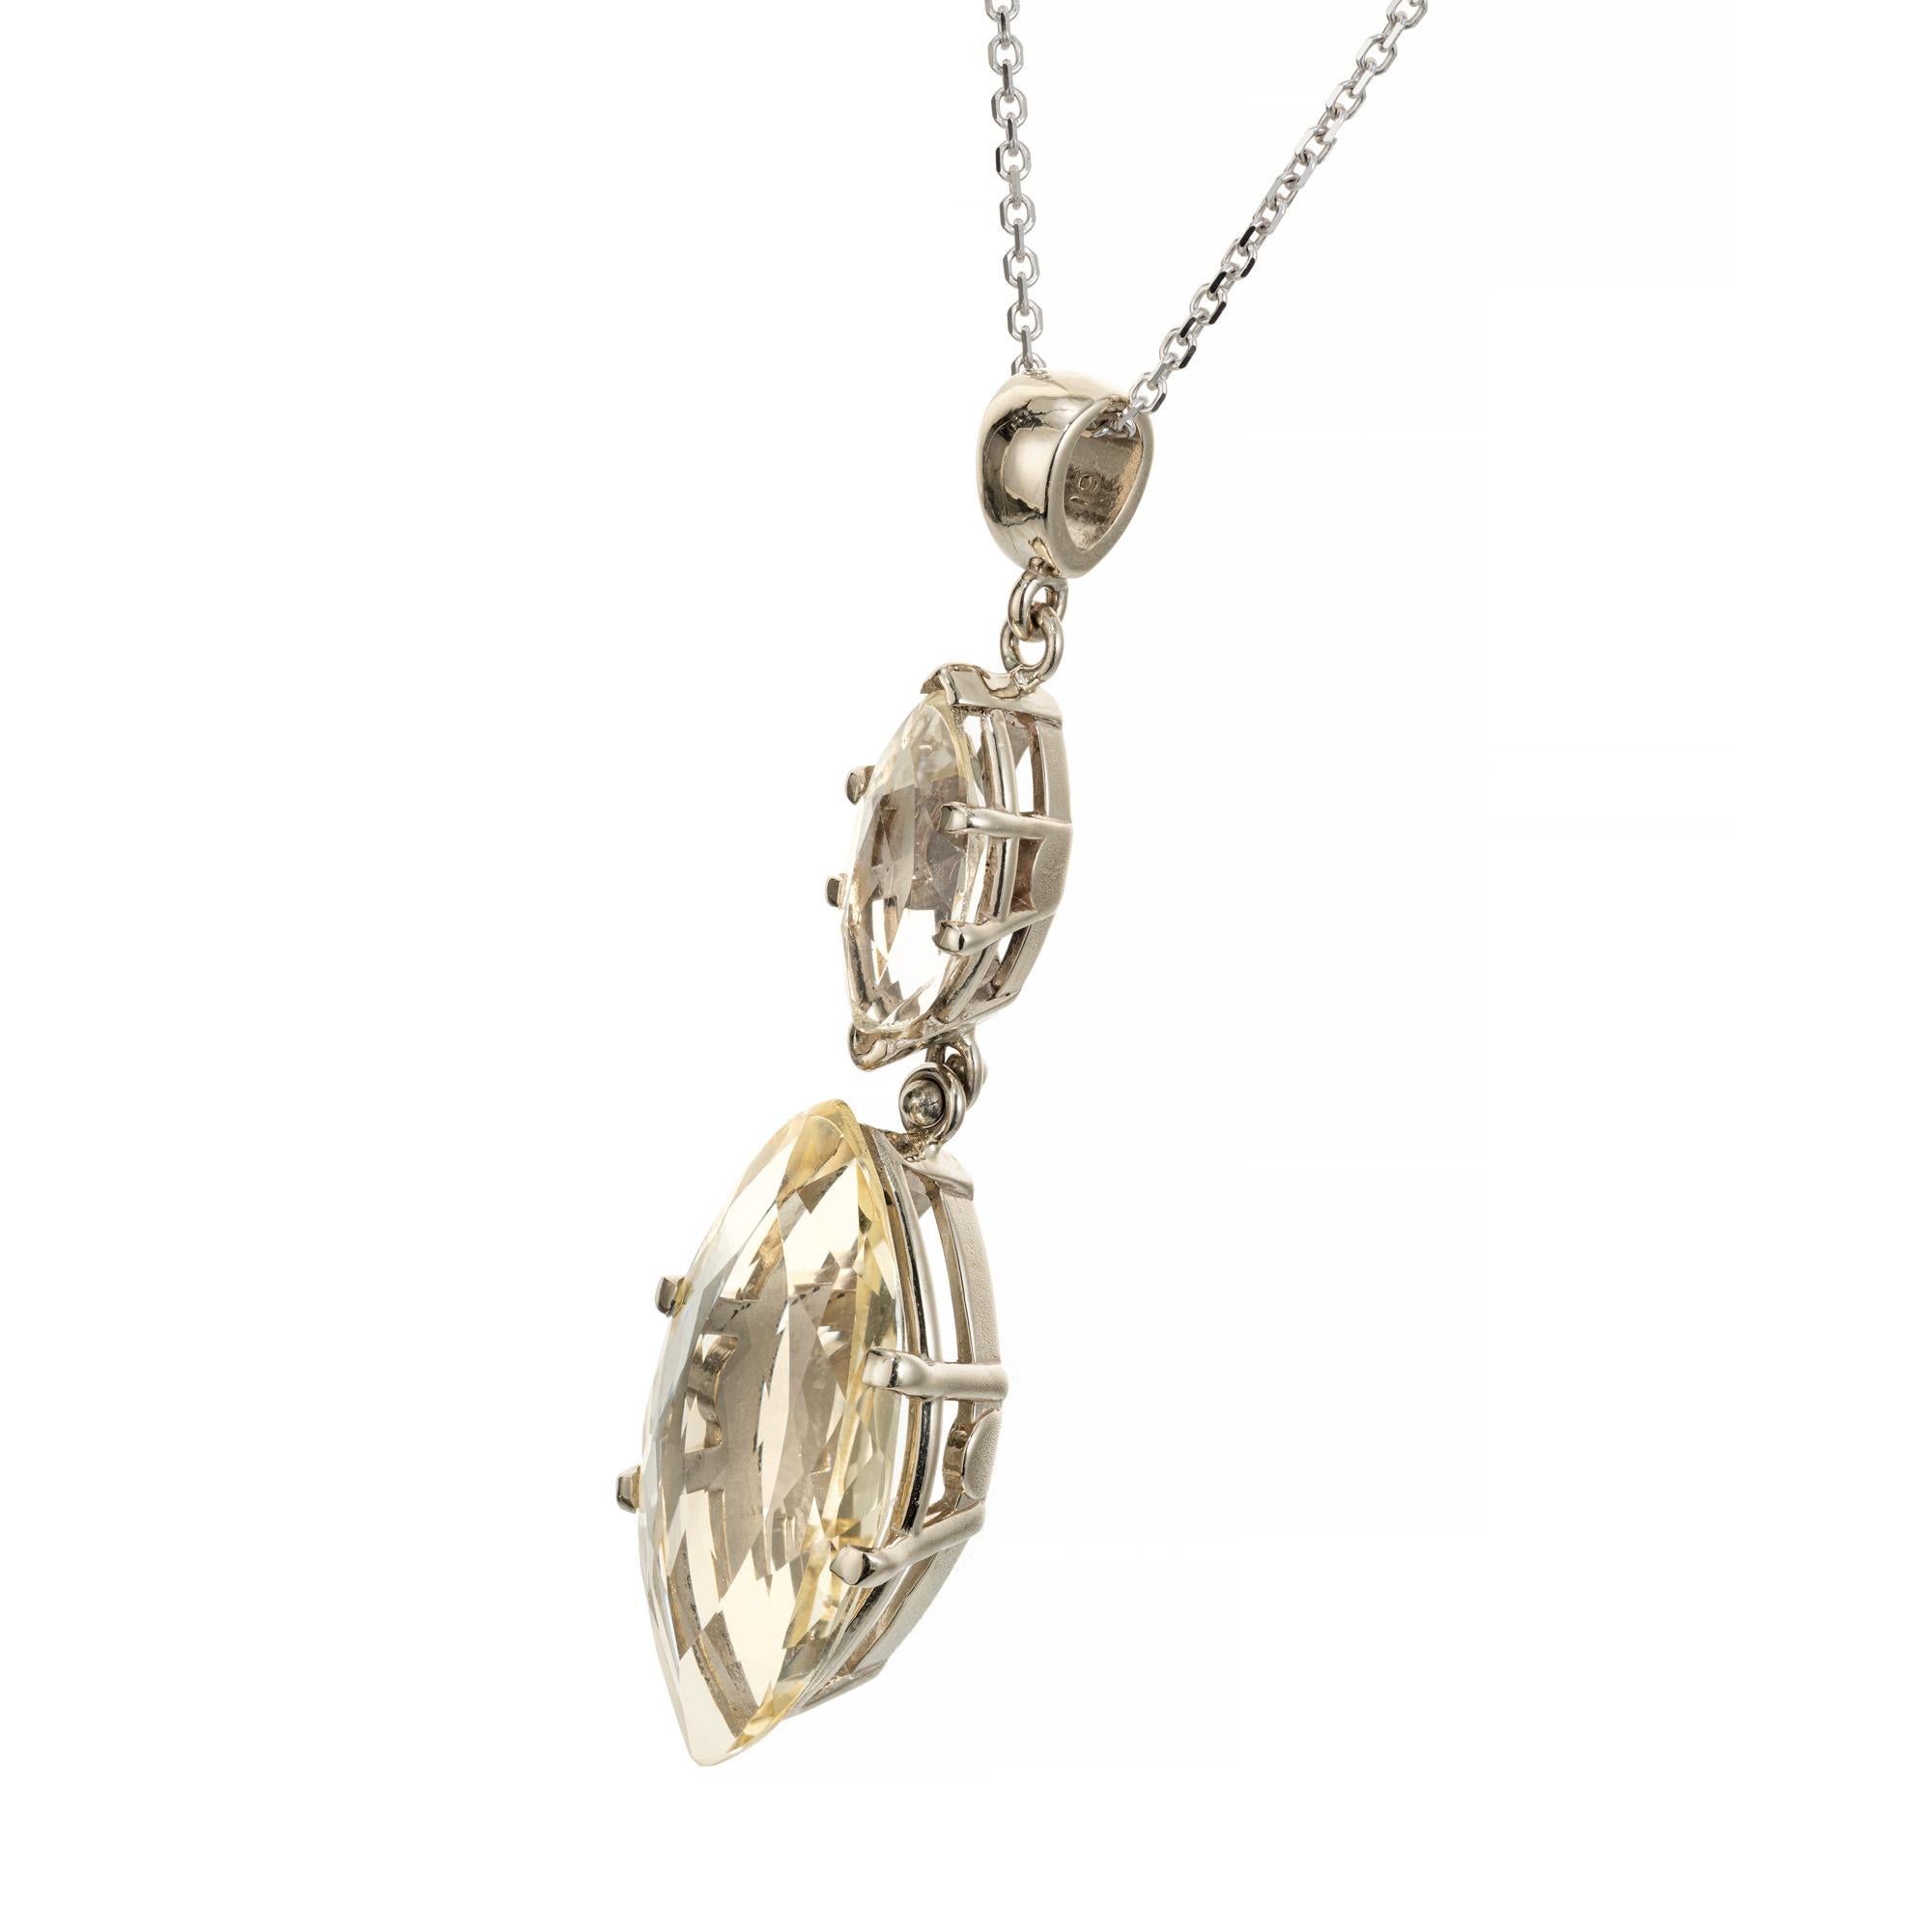 Two marquise cut Heliodor beryl pendant necklace. Light yellow 6.62ct marquise dangle with one 1.34ct marquise cut top stone set in 14k white gold. 16 inch white gold chain. 14k yellow gold bail.

1 marquise cut Heliodor approx. total weight